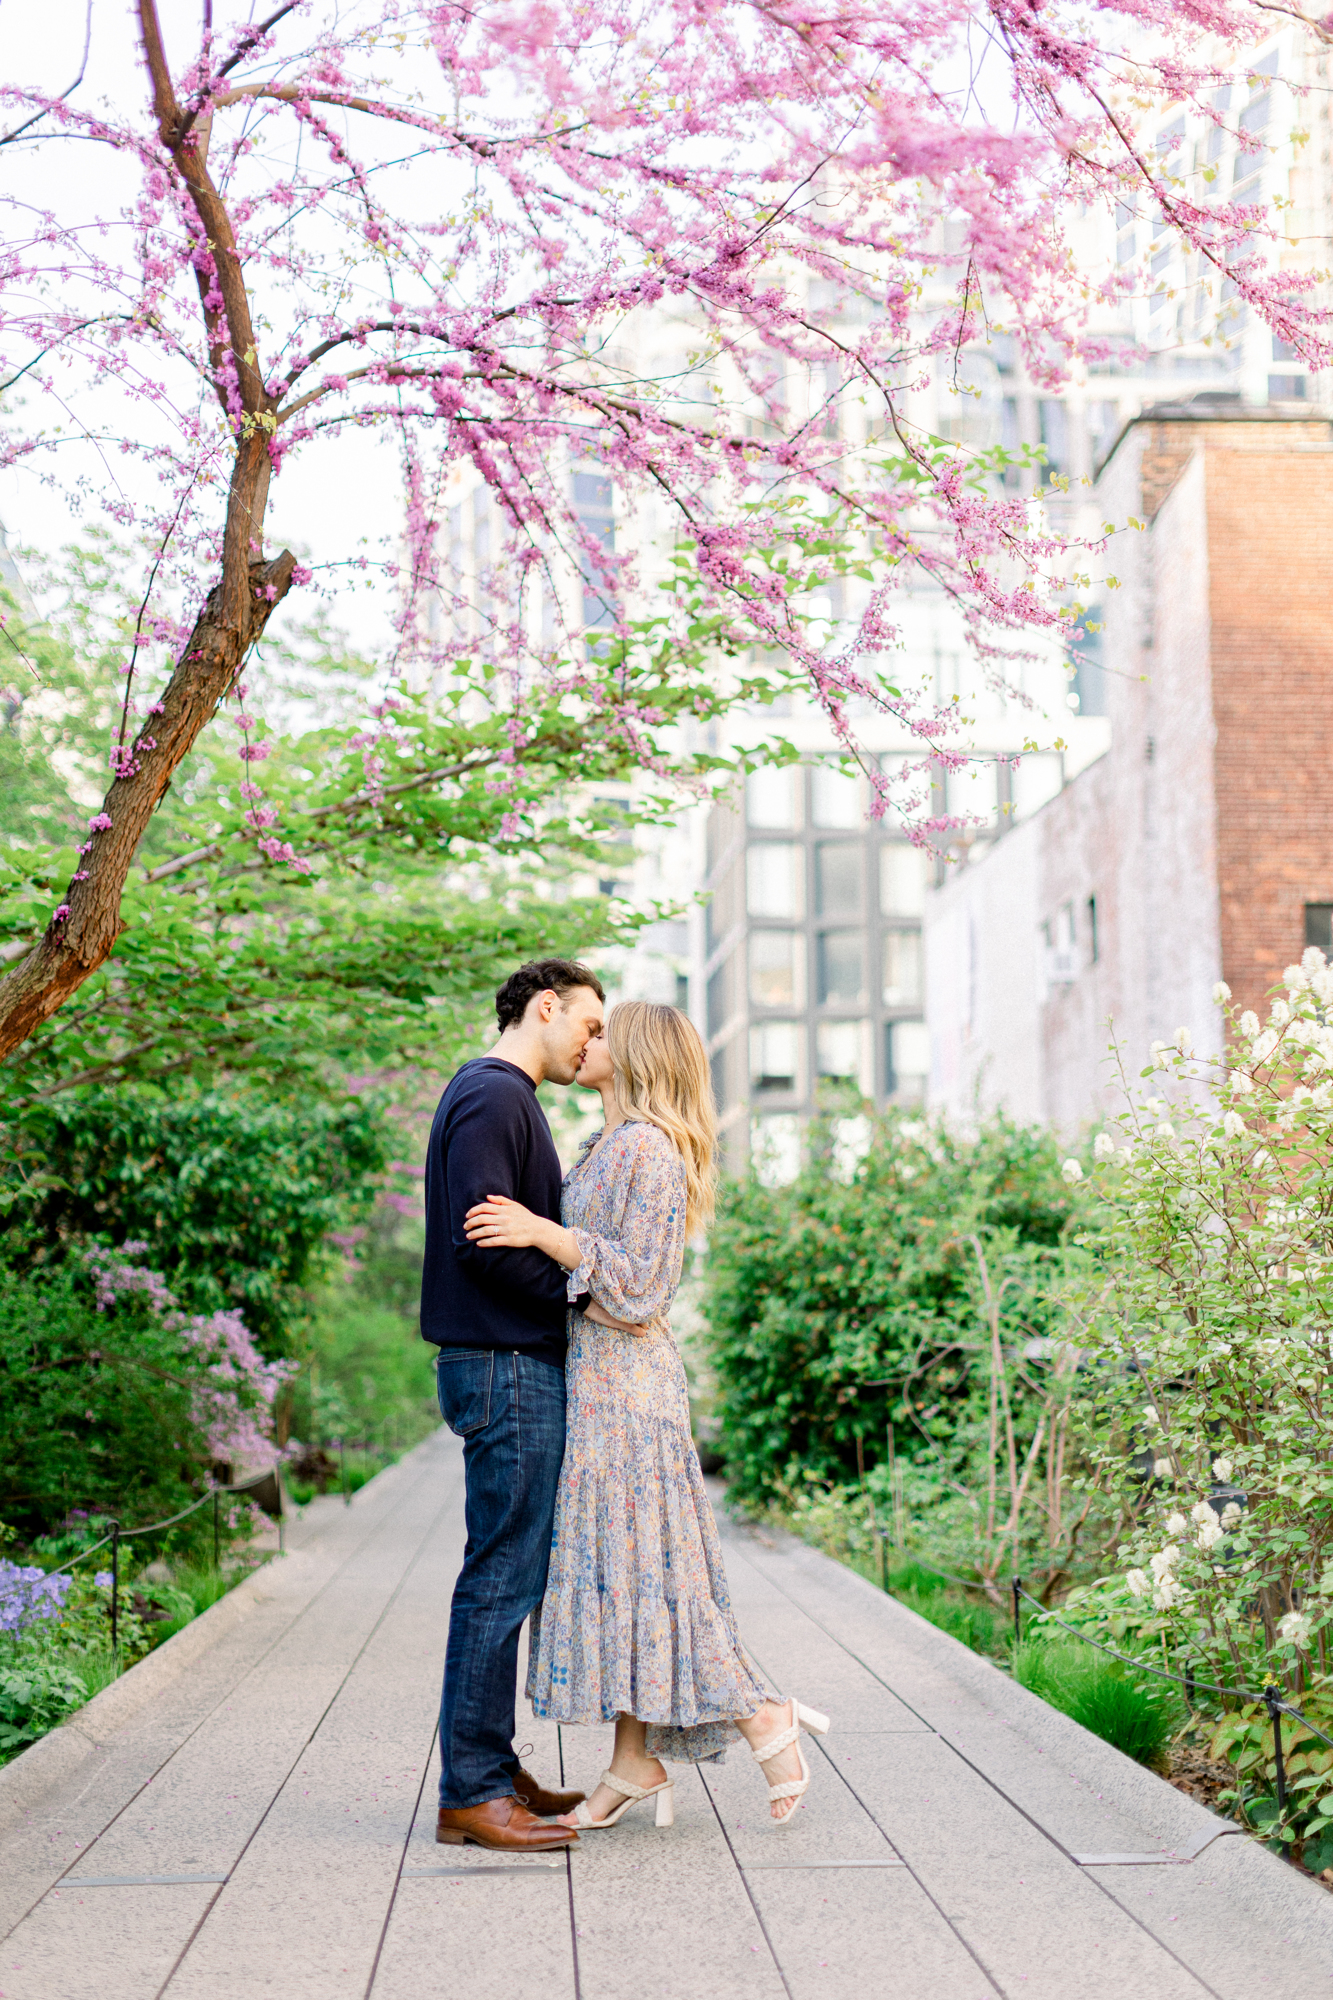 Flawless New York engagement photography